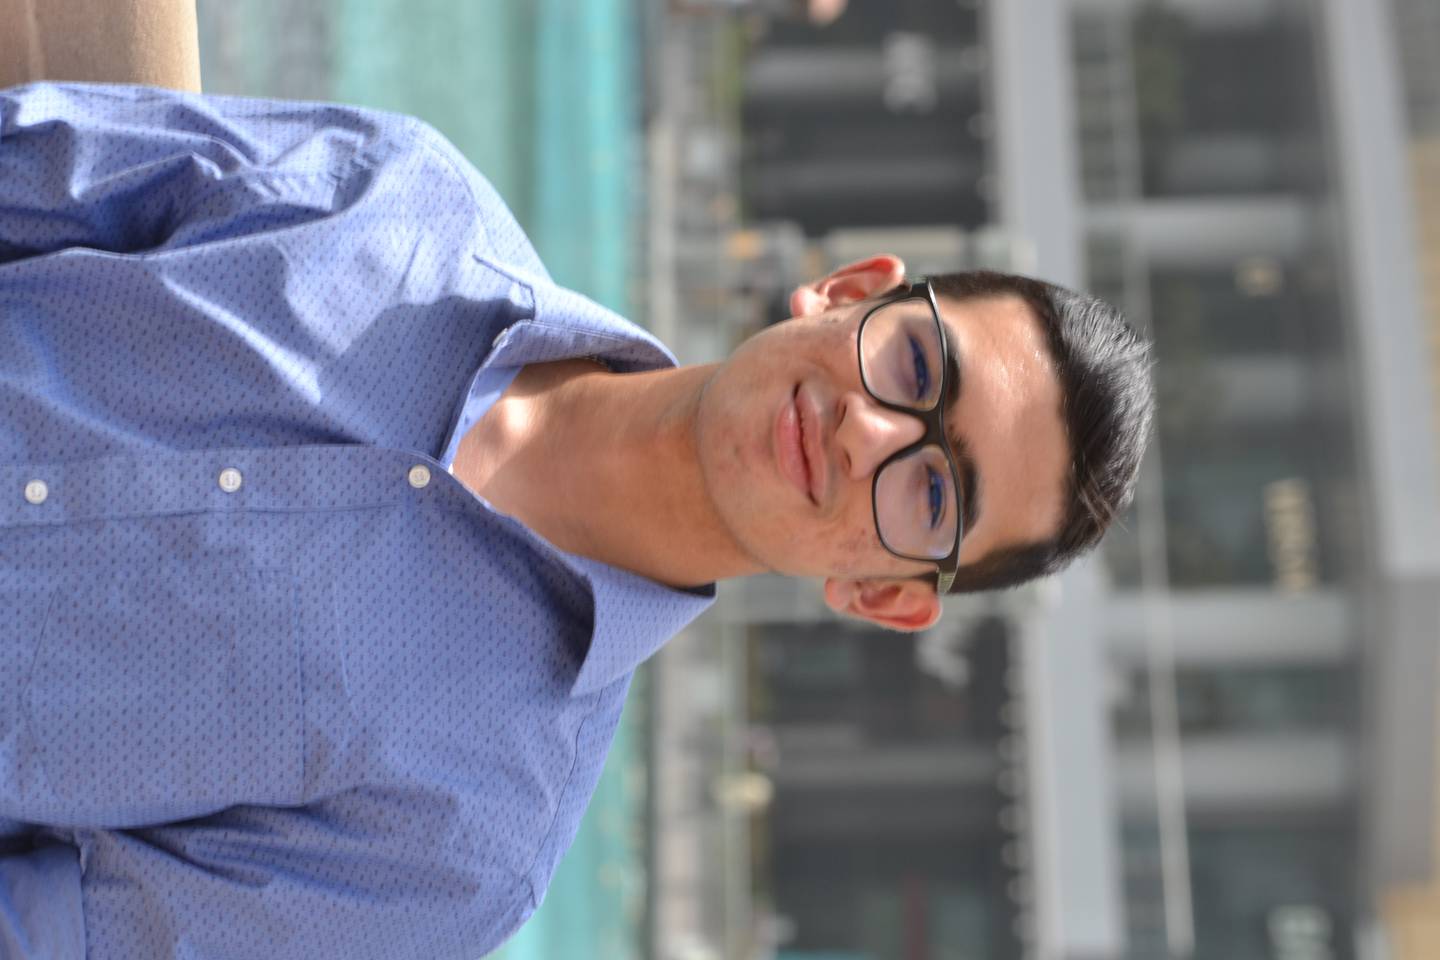 Colin Alfonso, a 17-year-old pupil in Dubai, is looking for opportunities to work part-time in the UAE. Photo: Colin Alfonso